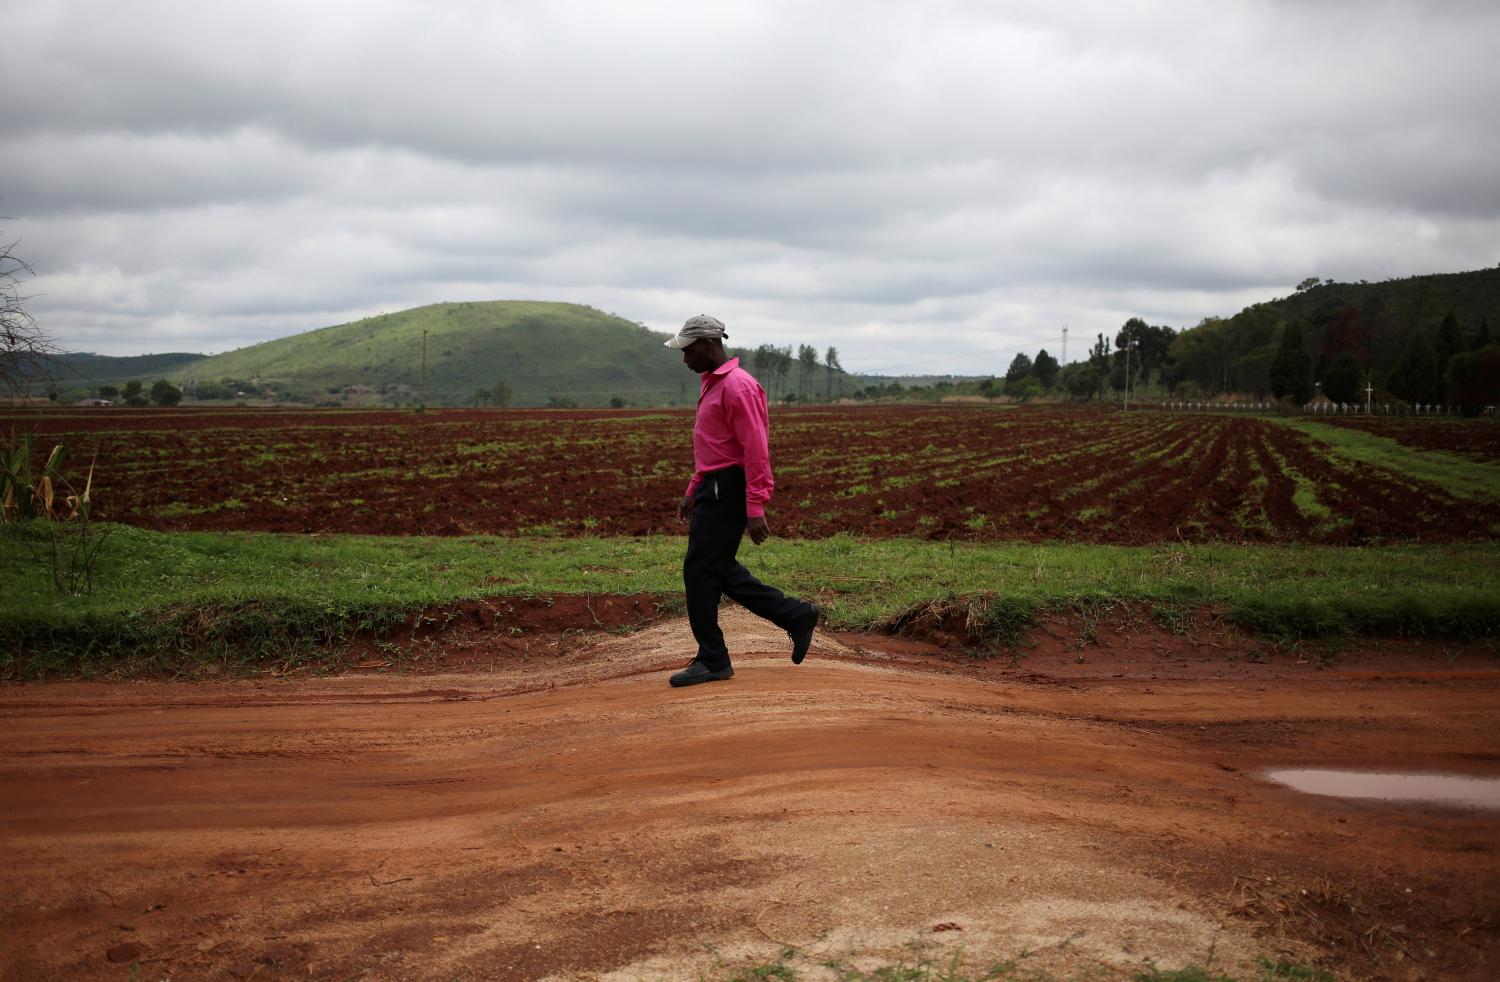 A man walks past a field used to grow maize in Chishawasha village, 27 km east of the capital Harare, Zimbabwe, November 26, 2017. REUTERS/Siphiwe Sibeko - RC15E67F4190